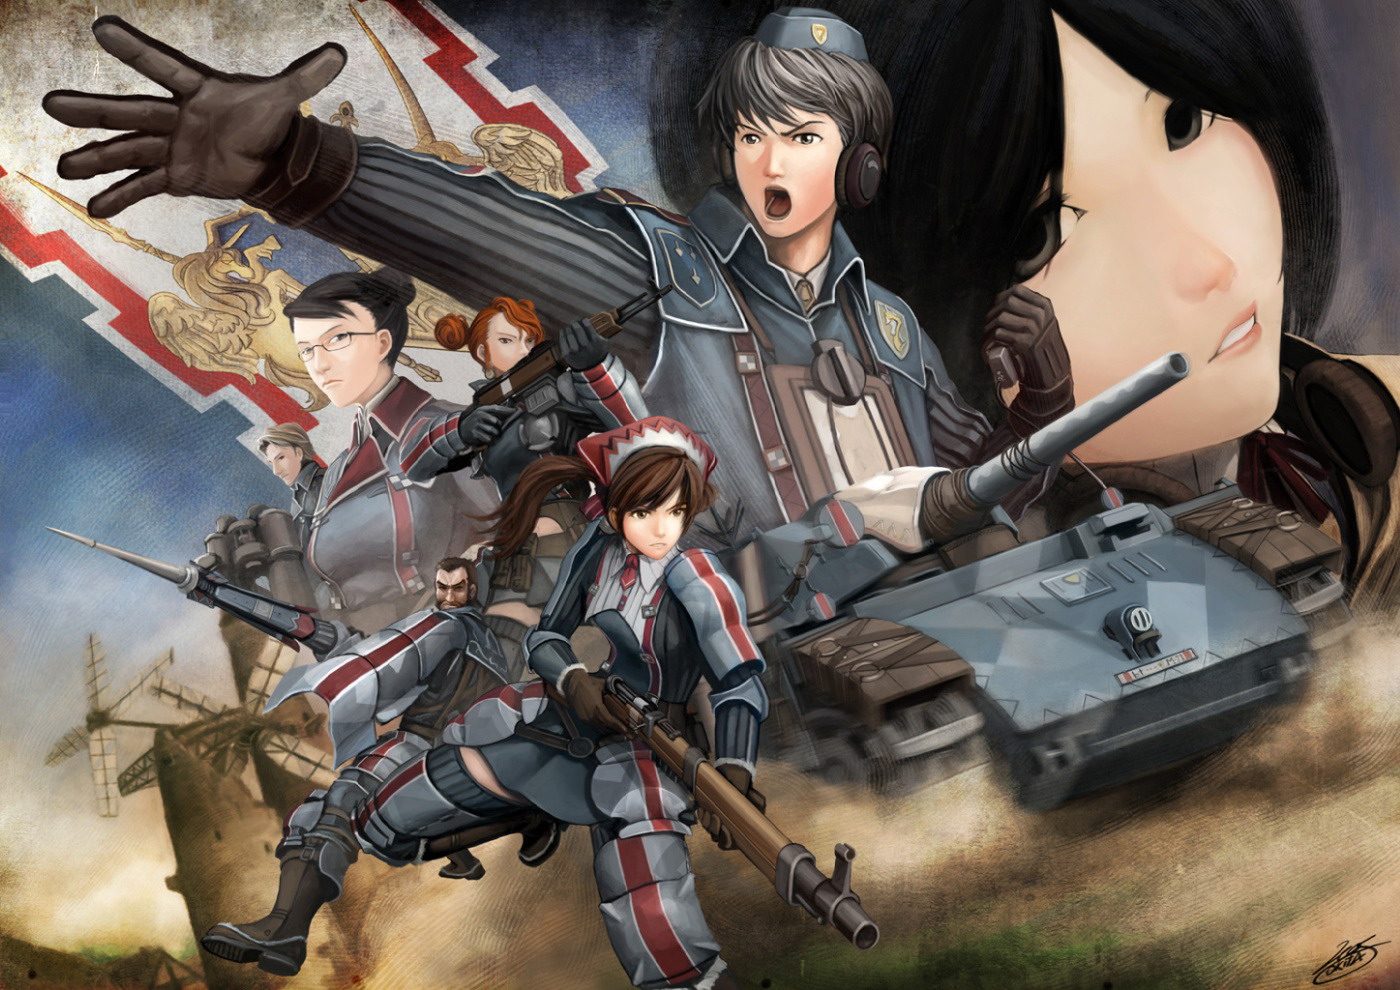 Valkyria Chronicles 3 anime coming out next month  SEGAbits  1 Source  for SEGA News